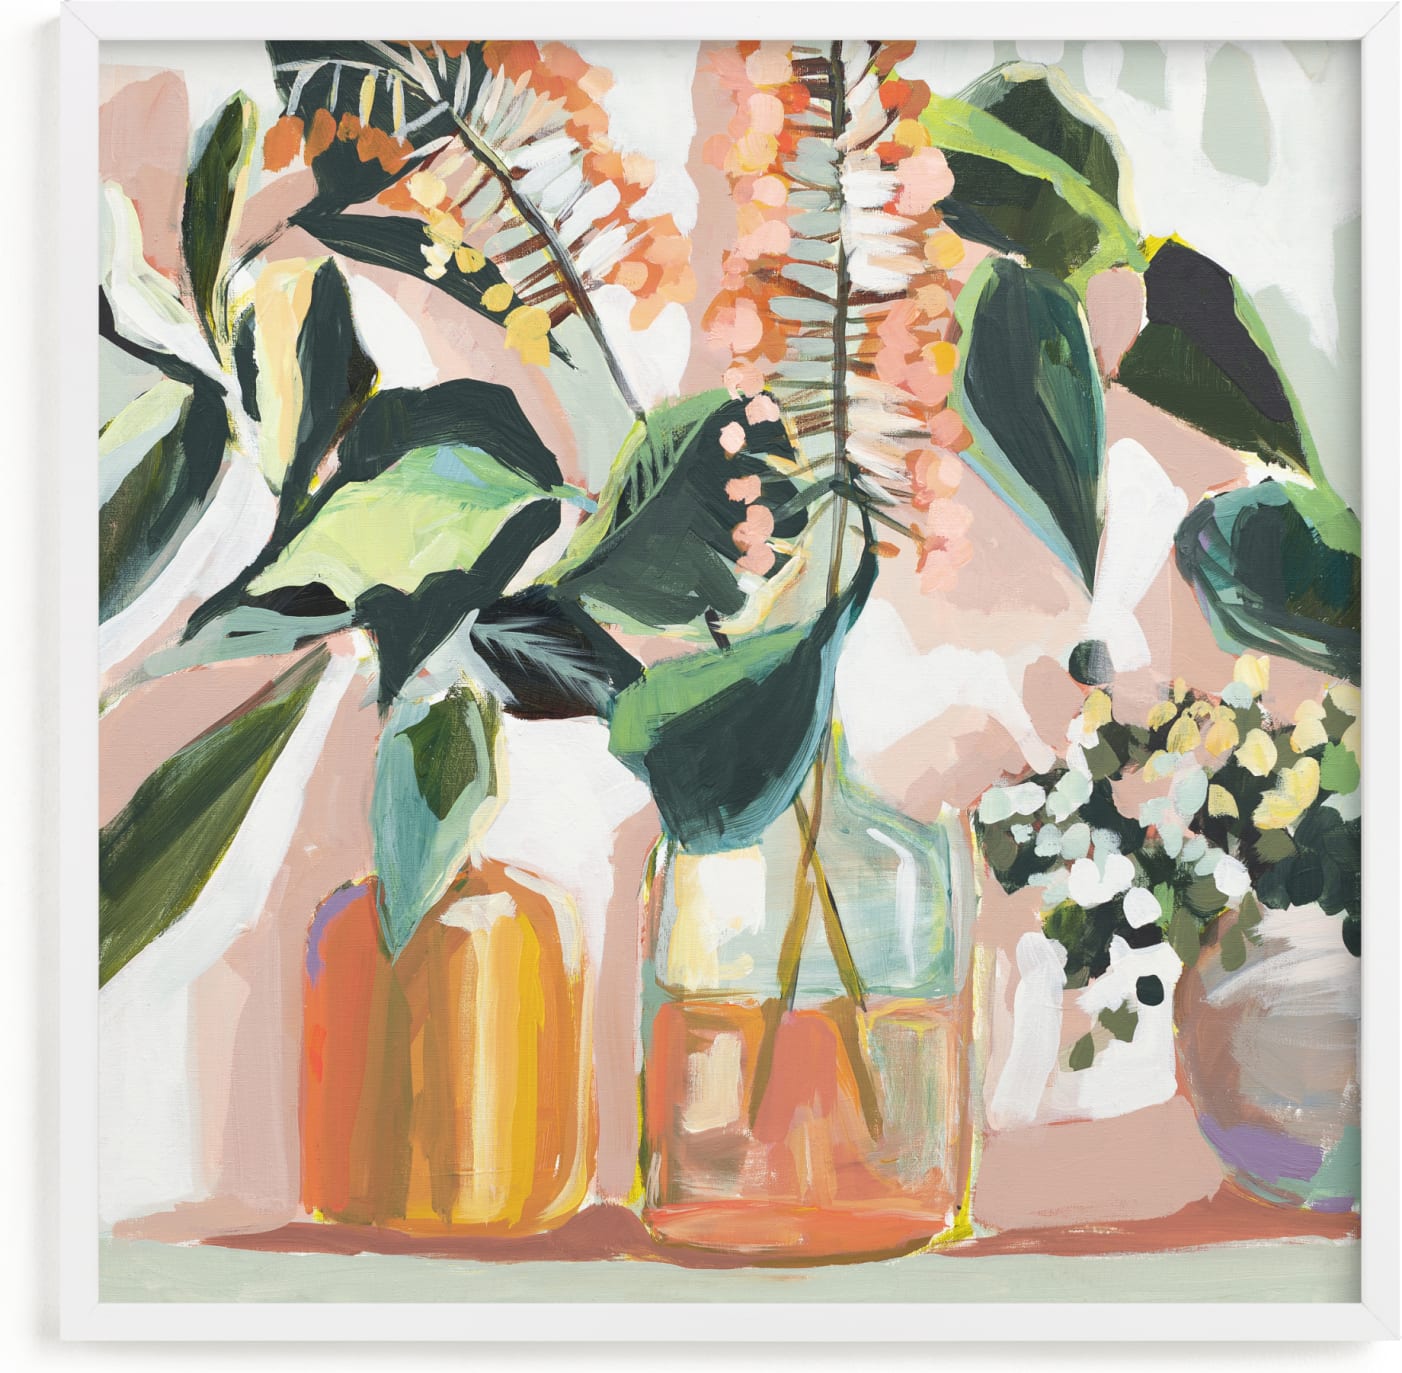 This is a pink, orange, green art by Jenny Westenhofer called Green Thumb.